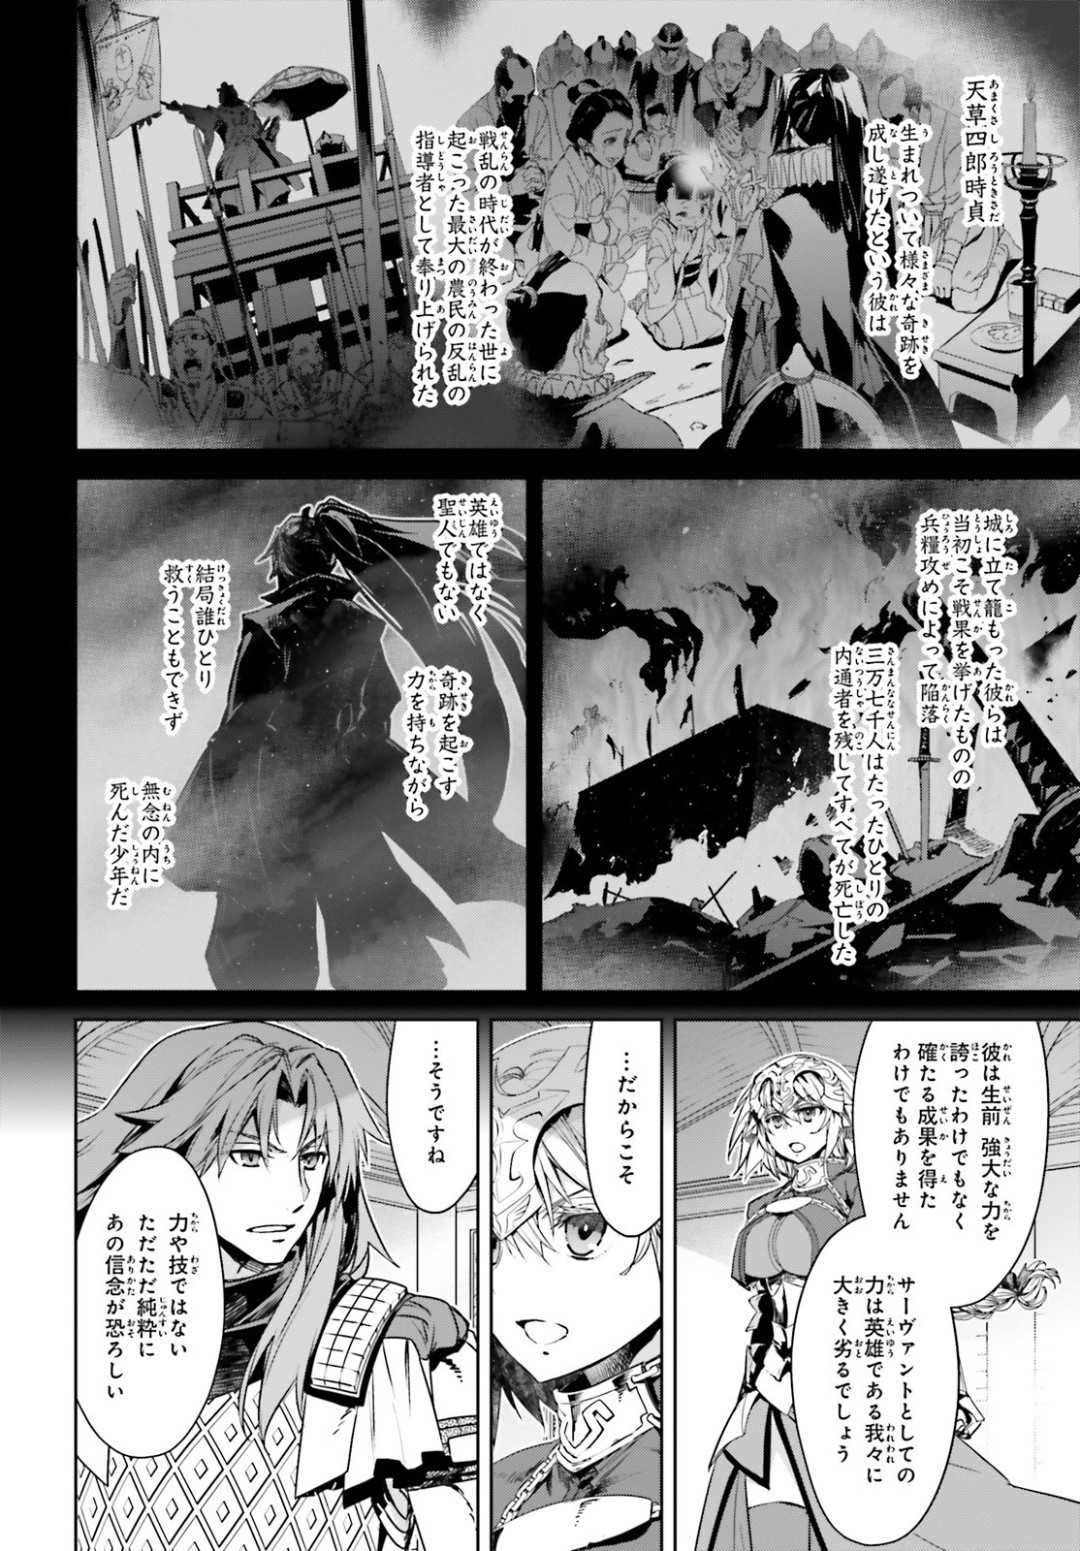 Fate-Apocrypha - Chapter 39 - Page 2